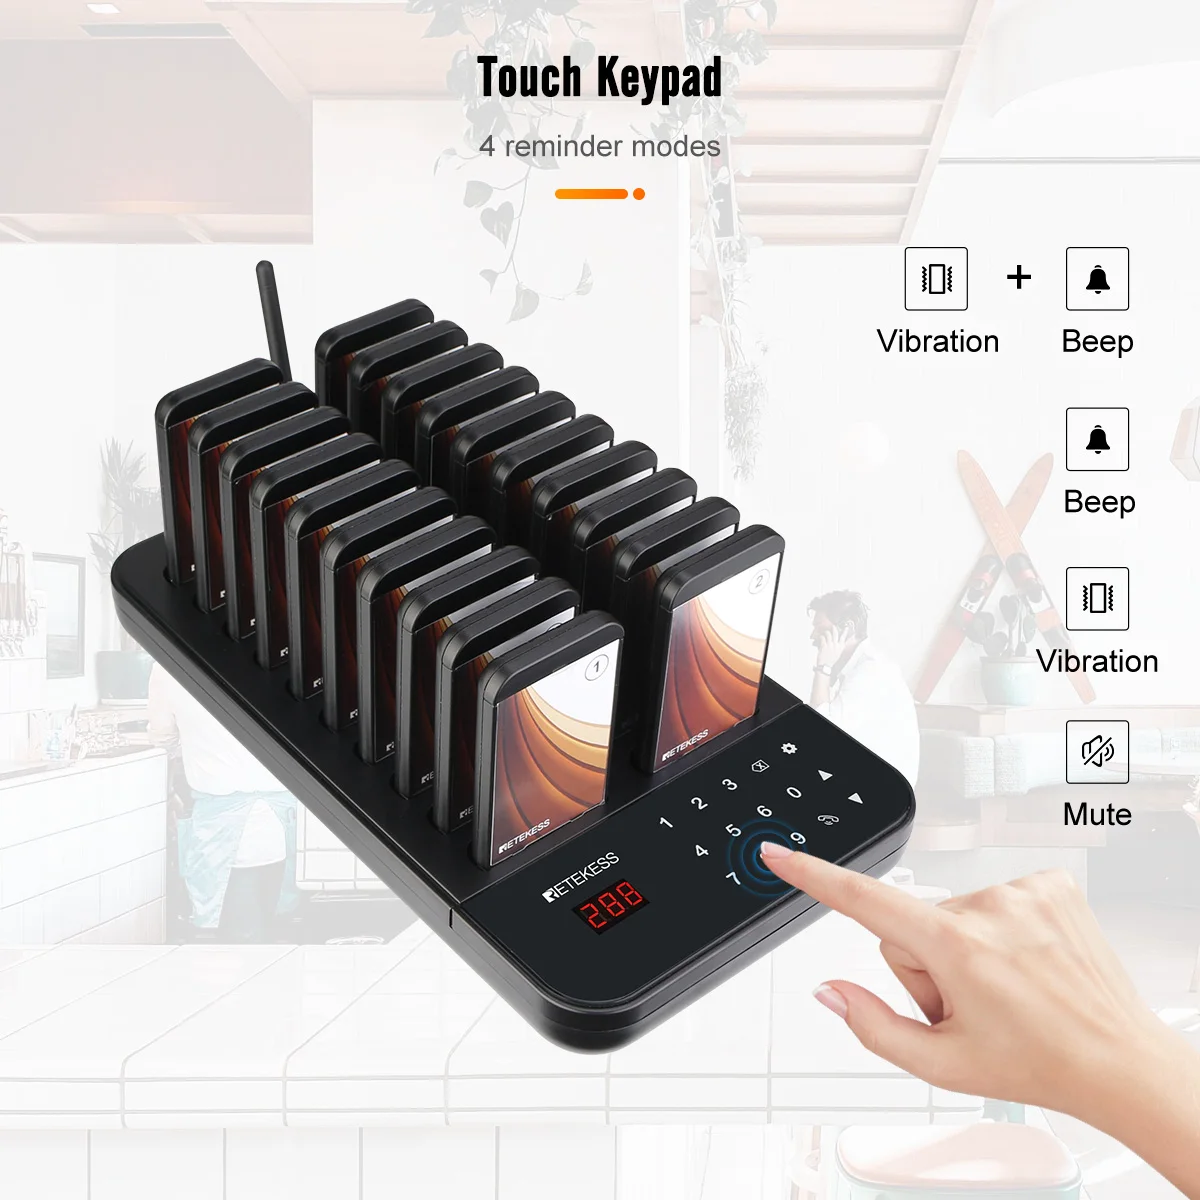 Retekess TD173 Restaurant Pager For Food Truck Coffee Wireless Calling System Vibrator Coaster Bell Buzzer Receivers Bar Chef